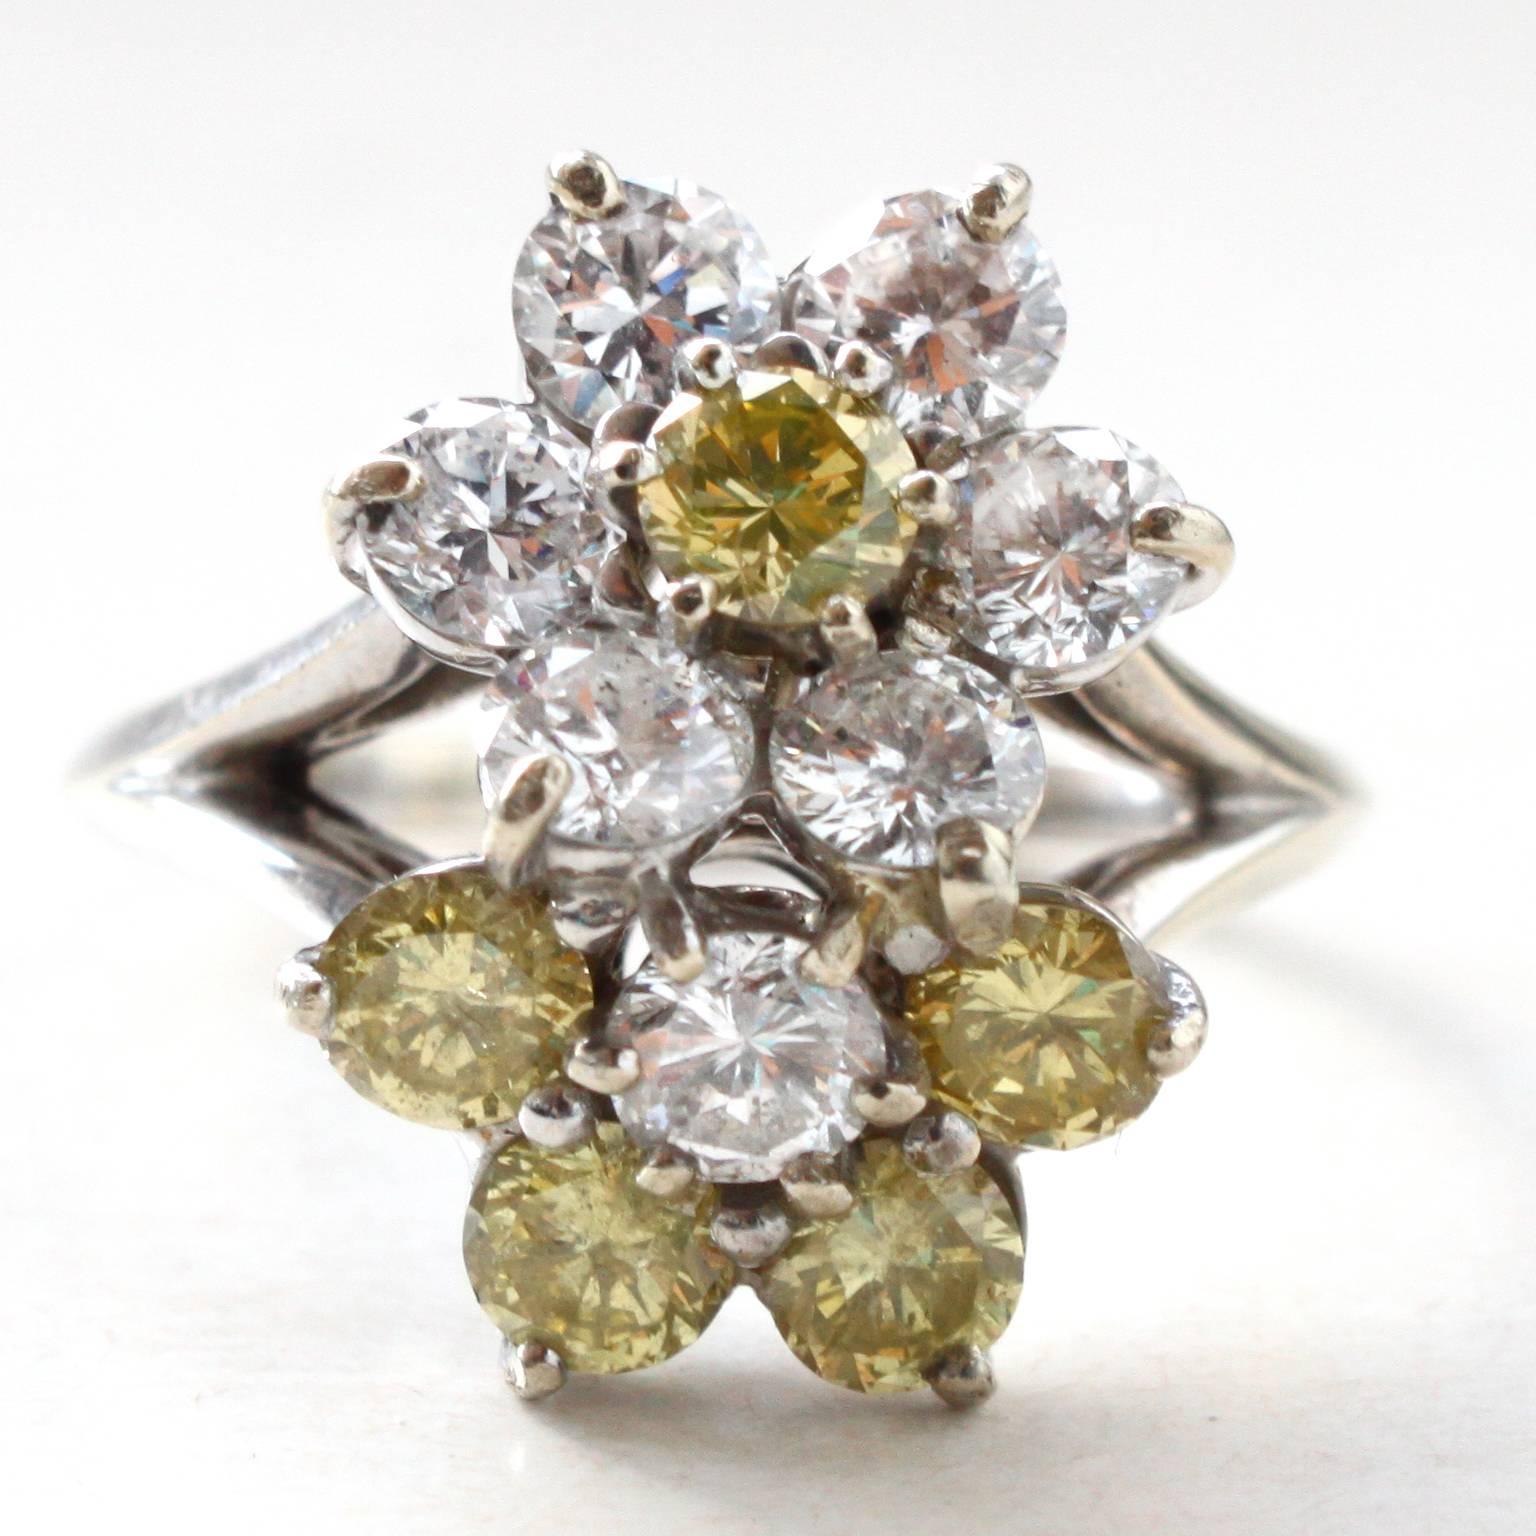 A very chic Fancy-coloured Yellow and White Diamond Cocktail Ring, by Mauboussin Paris.

The diamonds are arranged as two flowers and weigh circa 3 carats. The yellow diamonds are of intense color and the white diamonds are of D-F color. 

The ring